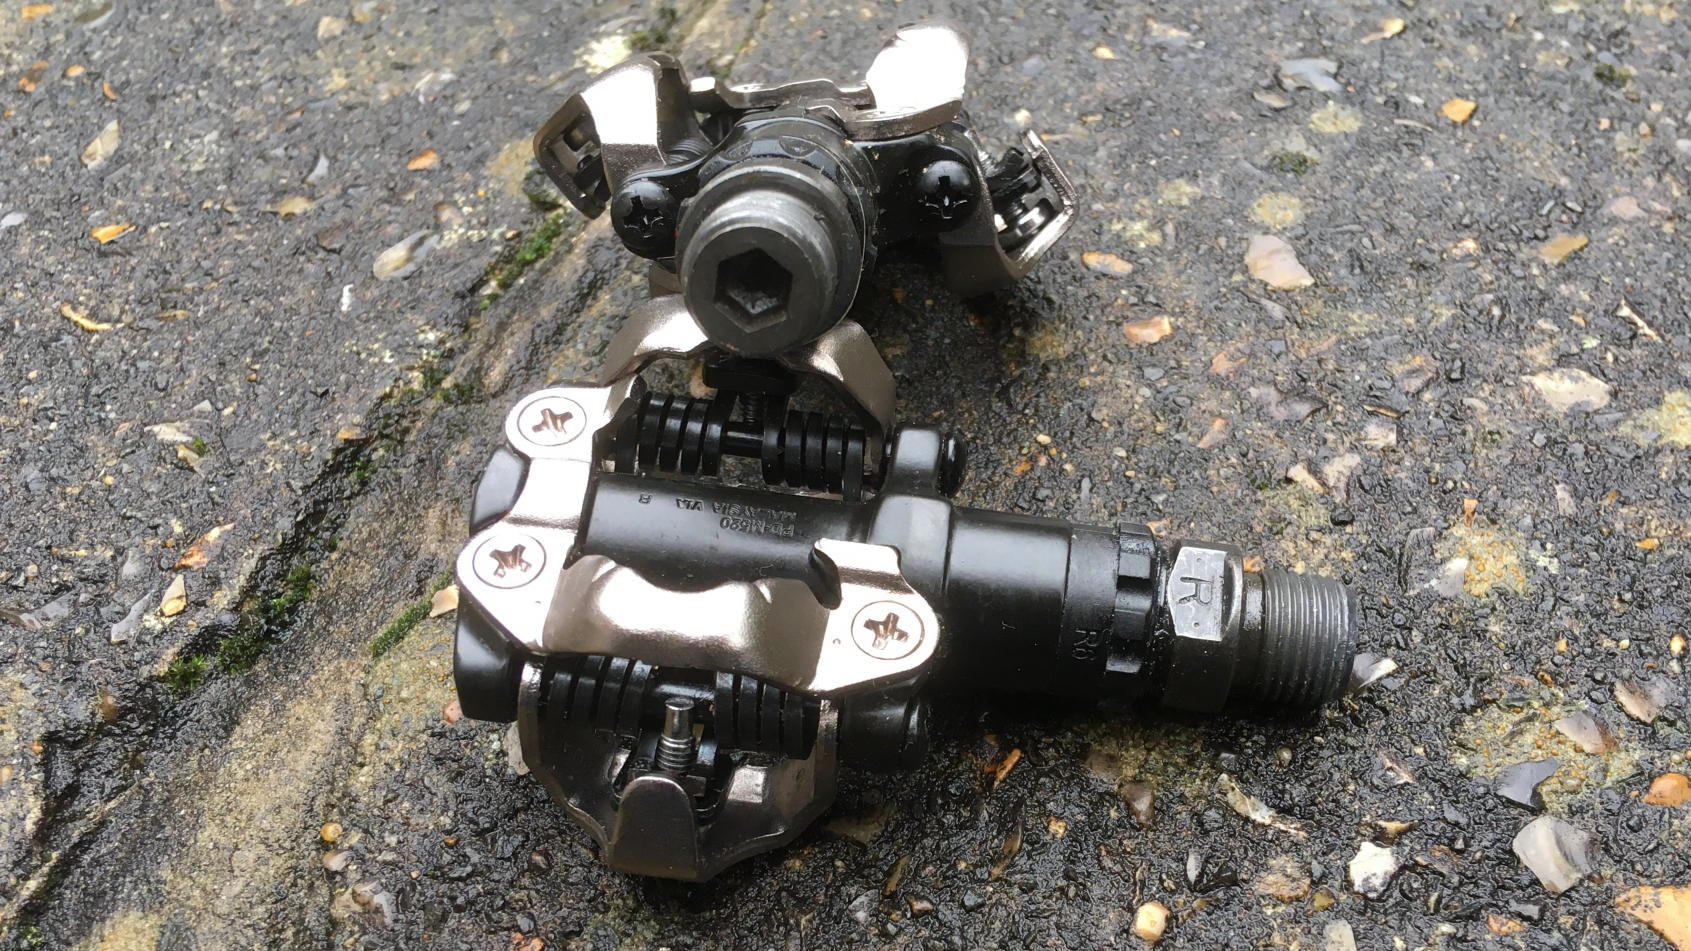 Image shows the Shimano PD-M520 pedals